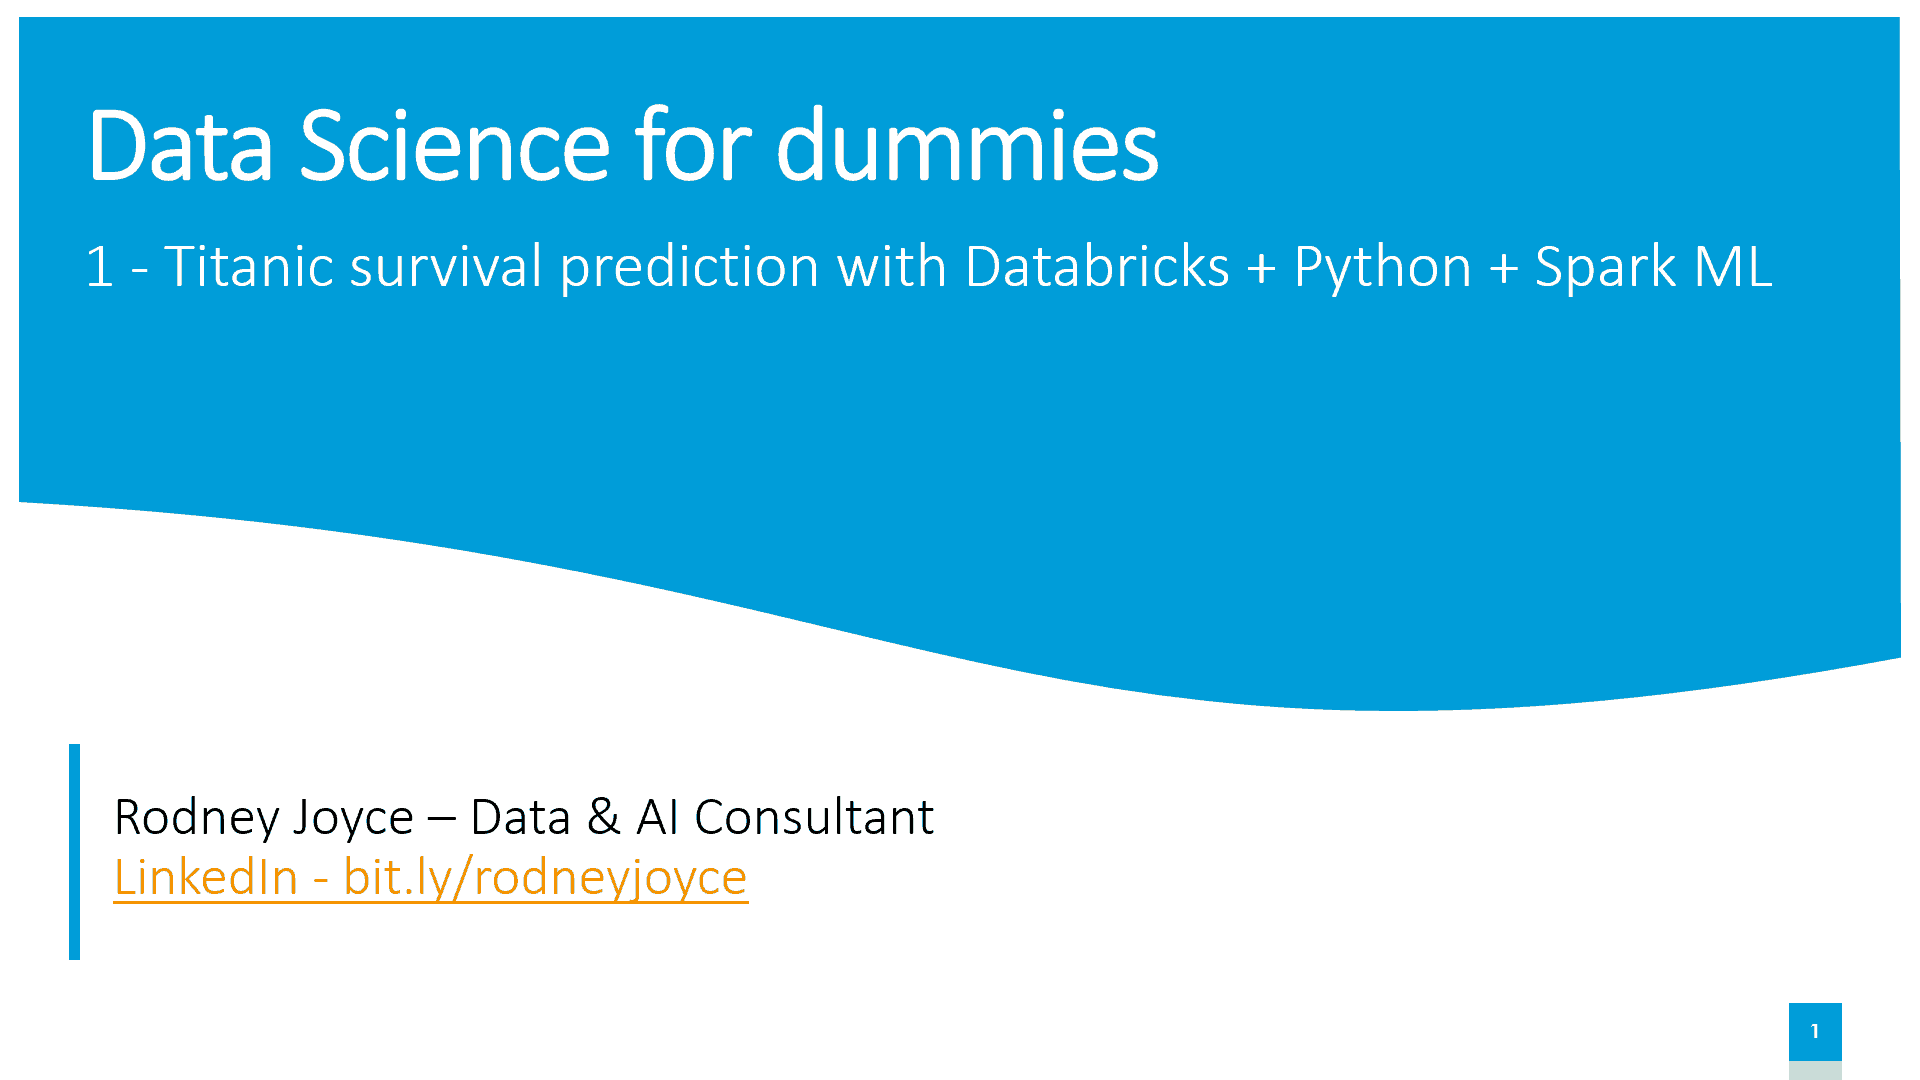 Data Science for dummies